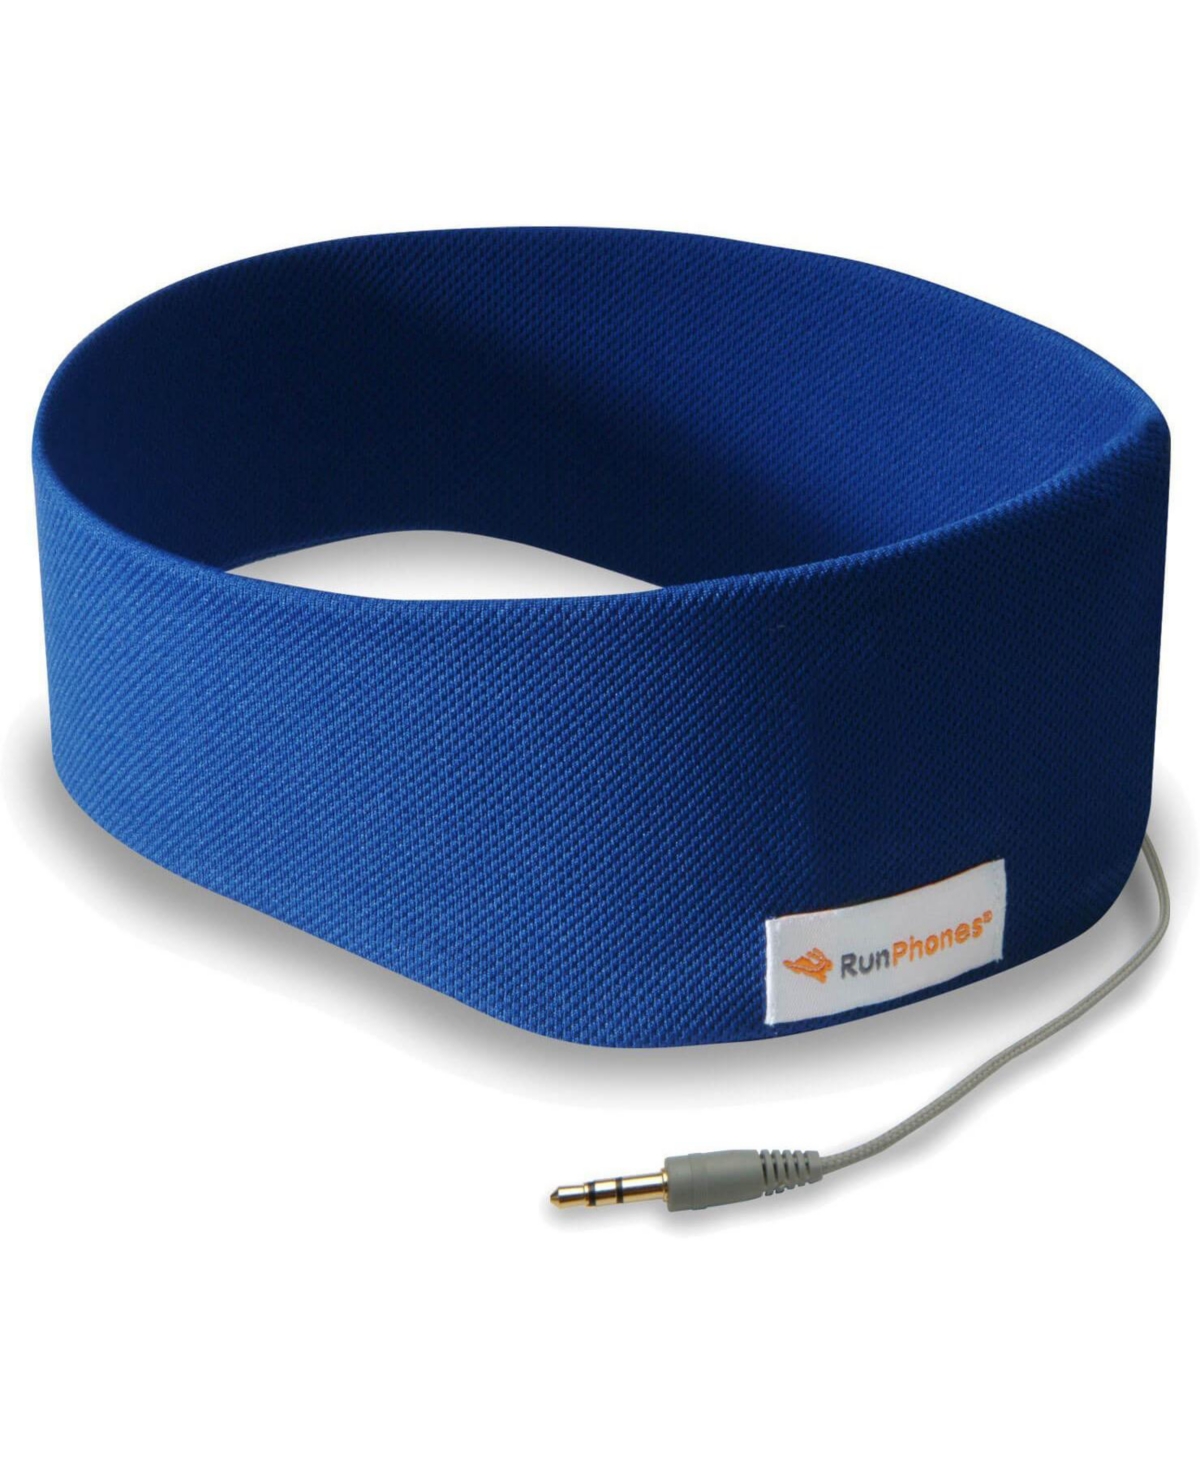 UPC 812765020632 product image for Acoustic Sheep RunPhones Classic (Royal Blue) | upcitemdb.com